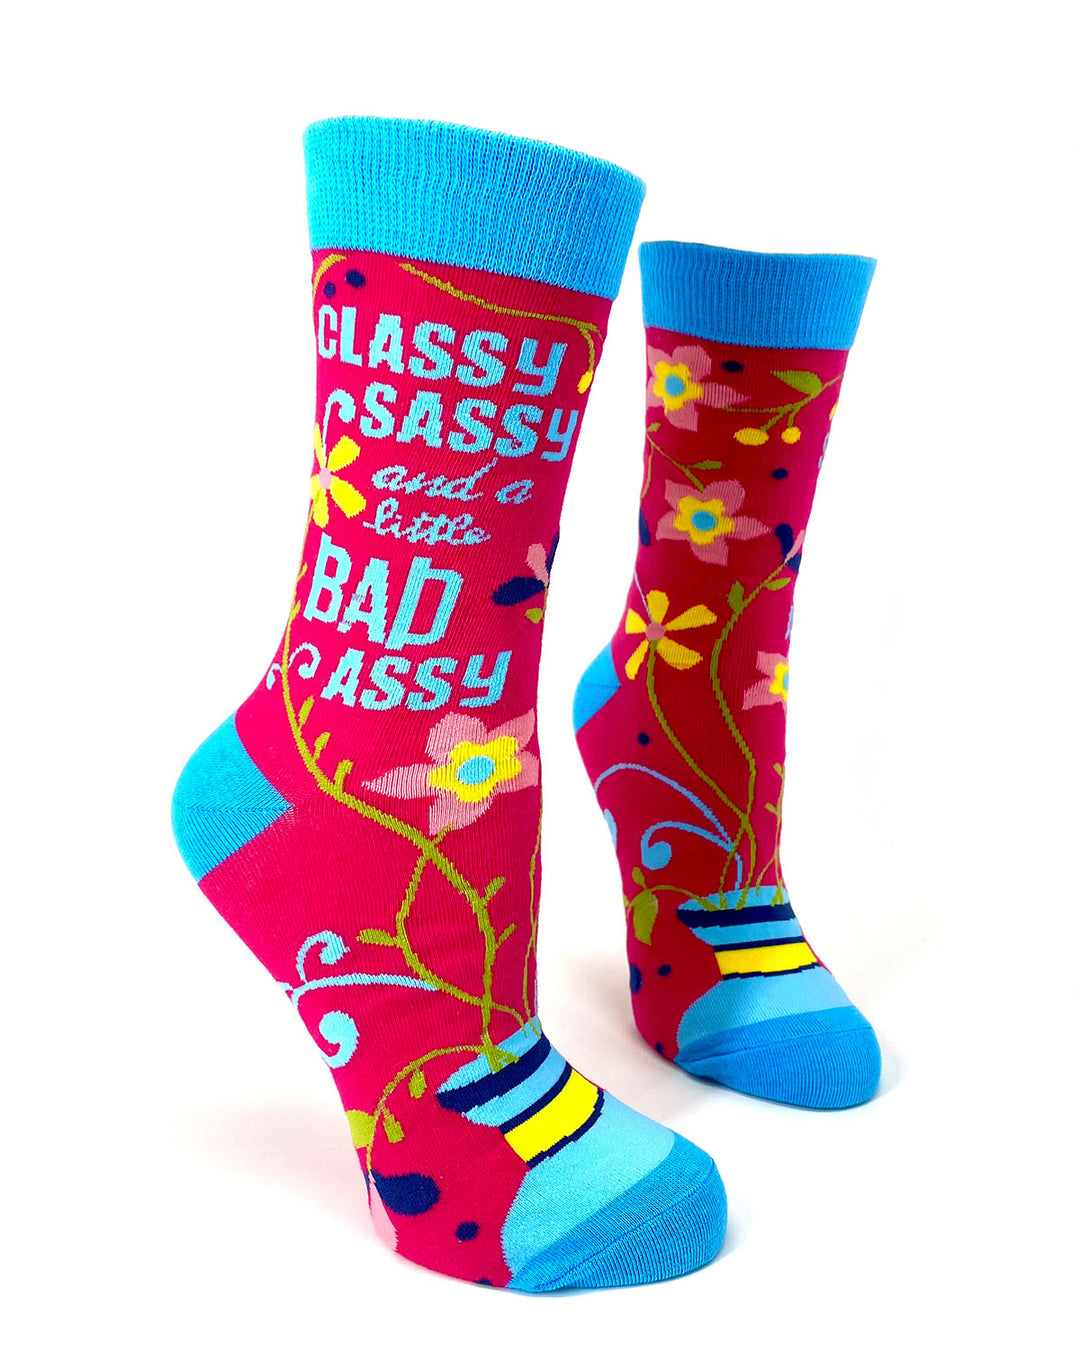 Fabdaz funny socks collection with red blue floral design saying classy sassy and a little bad assy